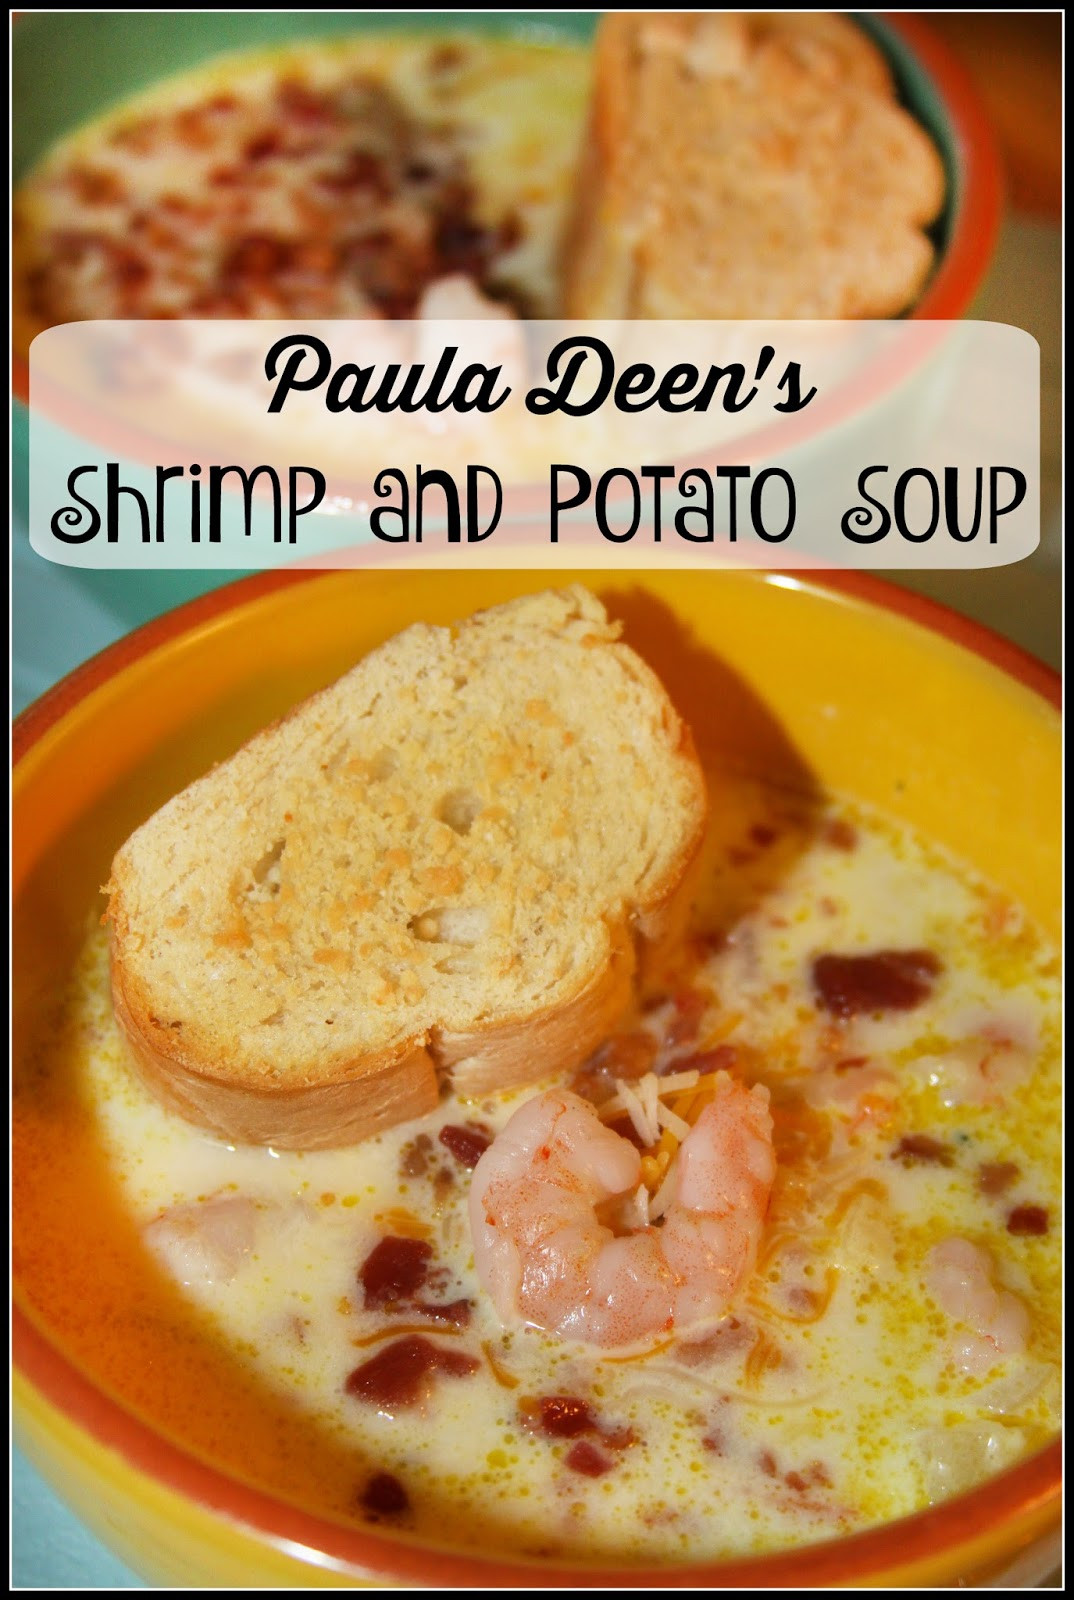 Seafood Casserole Paula Deen
 For the Love of Food 10 Mouthwatering Holiday Potato Side